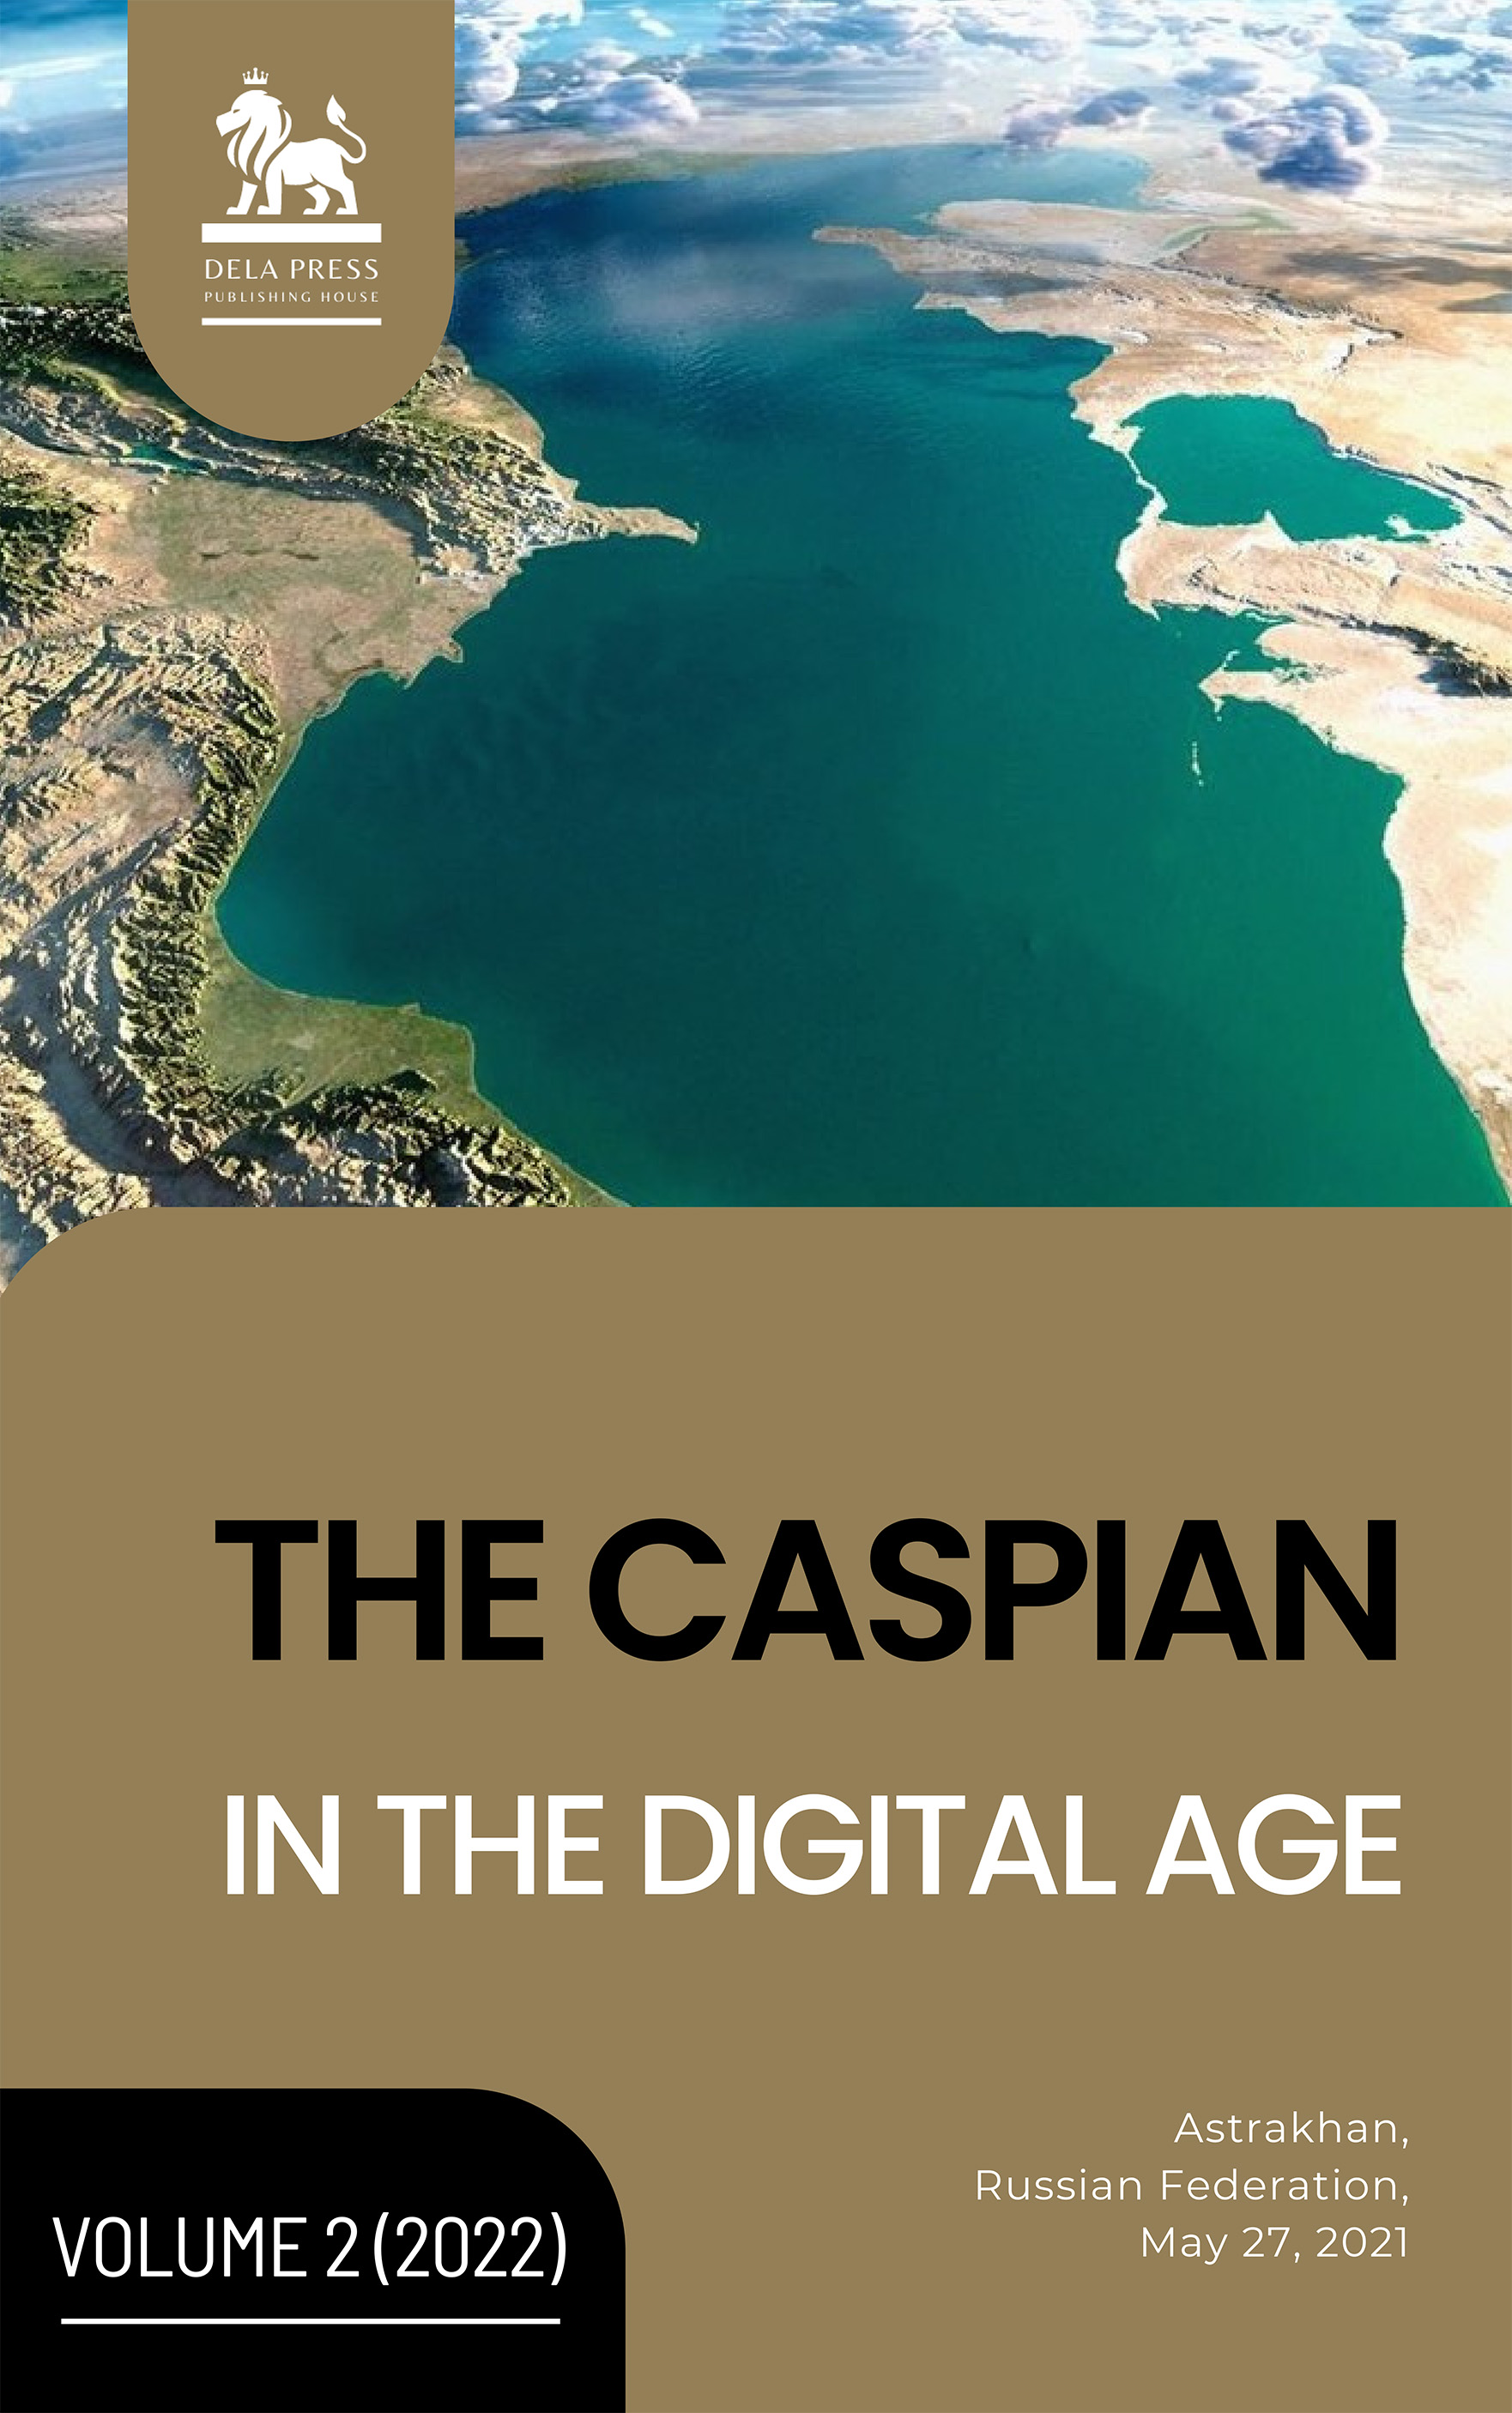 					View No. 002 (2022): "The Caspian in the Digital Age" within the framework of the International Scientific Forum "Caspian 2021: Ways of Sustainable Development"
				